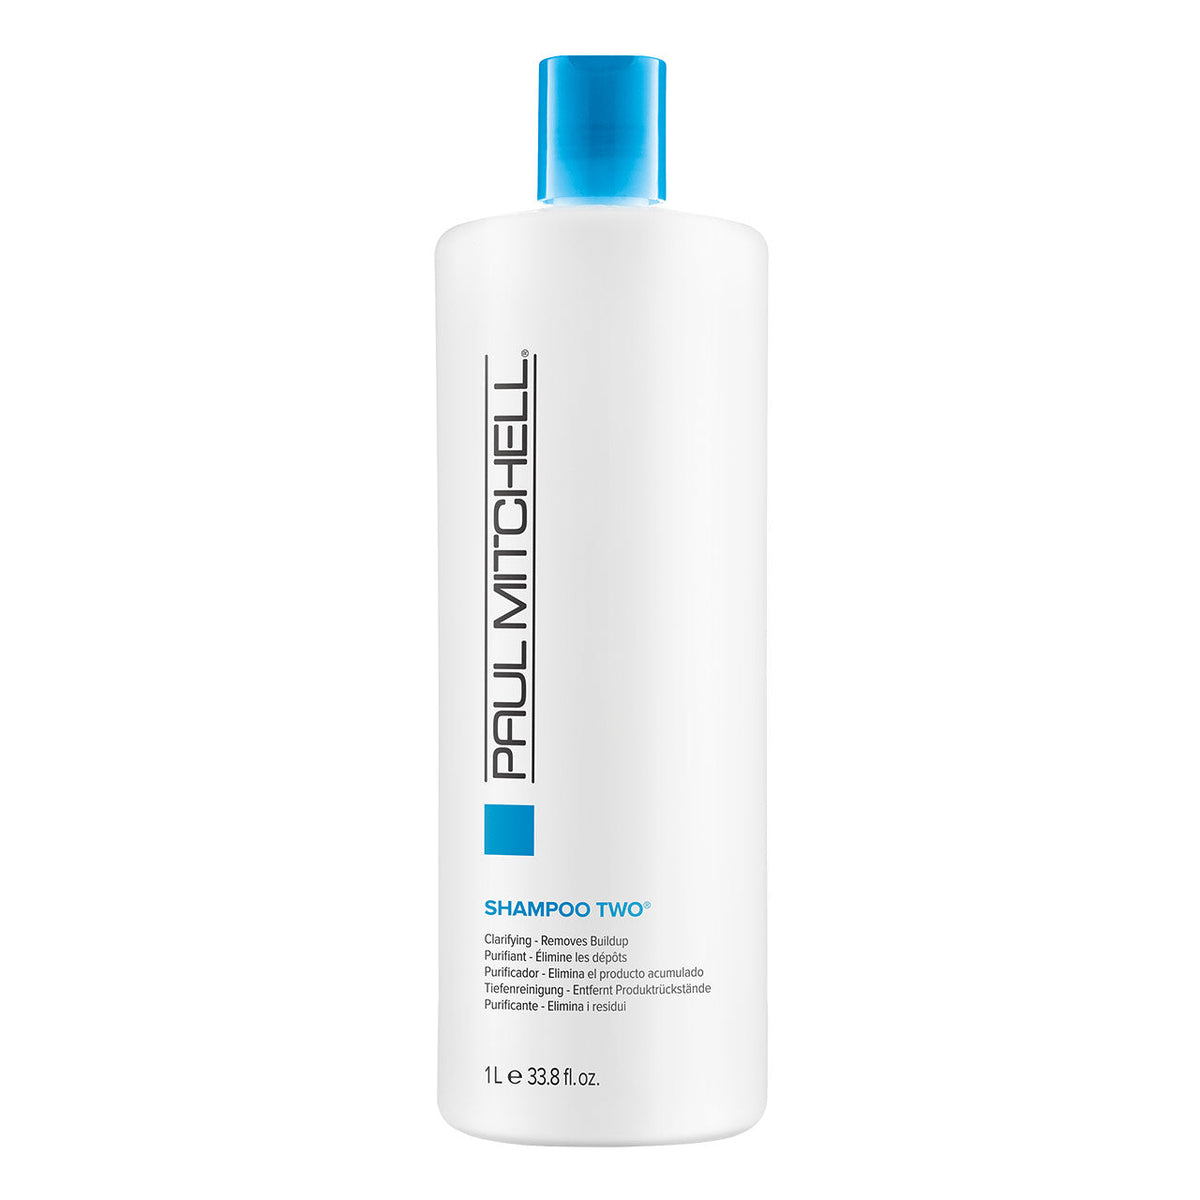 Clarifying Shampoo Two - 1L - by Paul Mitchell |ProCare Outlet|